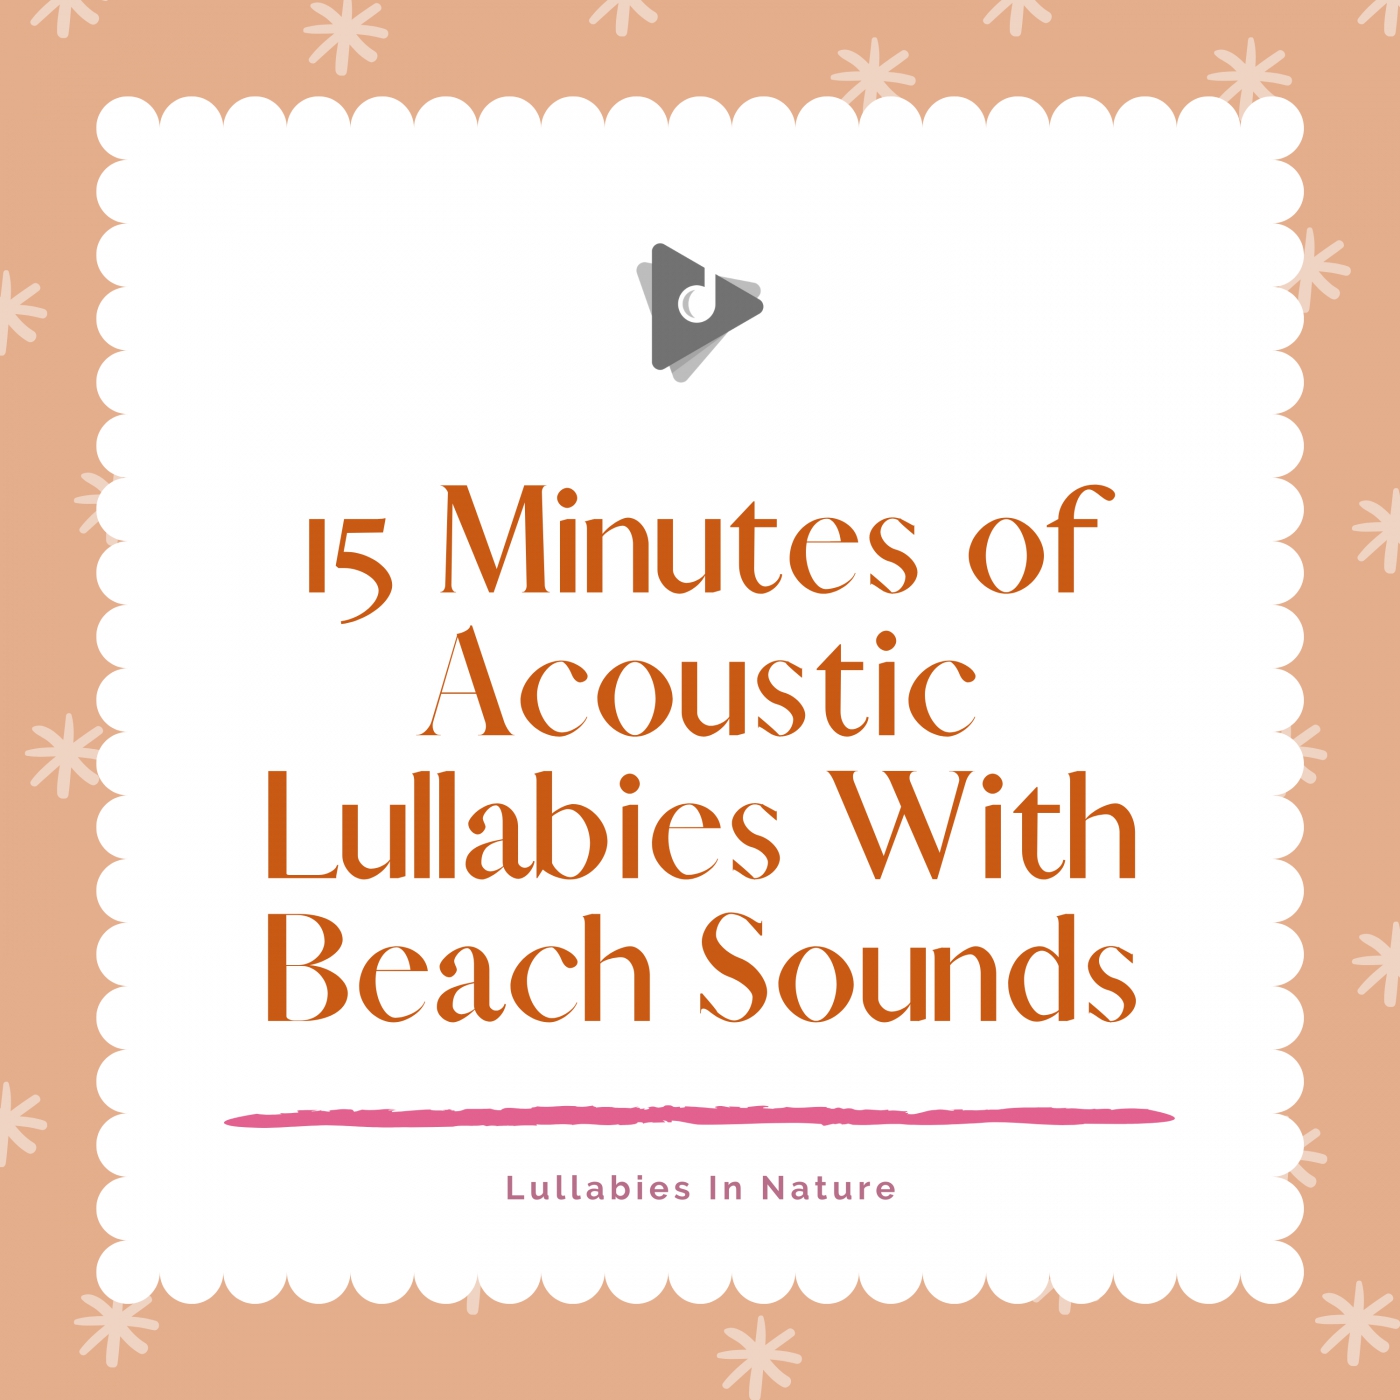 15 Minutes of Acoustic Lullabies With Beach Sounds